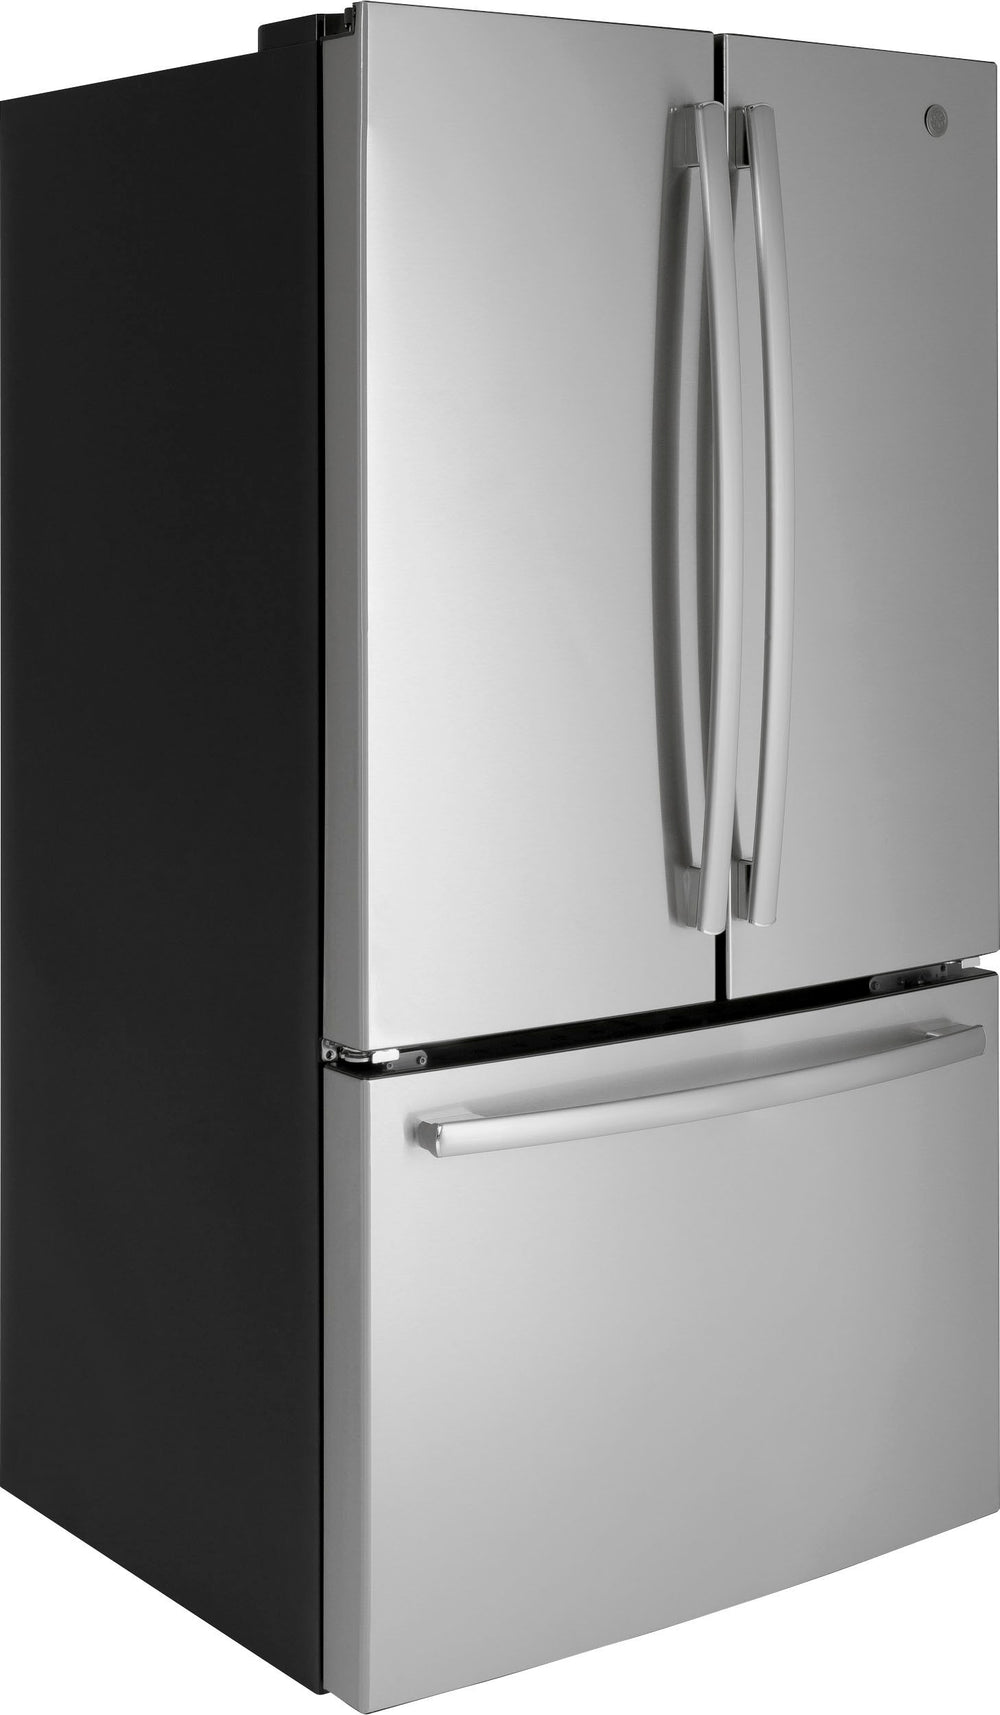 GE - 27.0 Cu. Ft. French Door Refrigerator with Internal Water Dispenser - Stainless steel_1